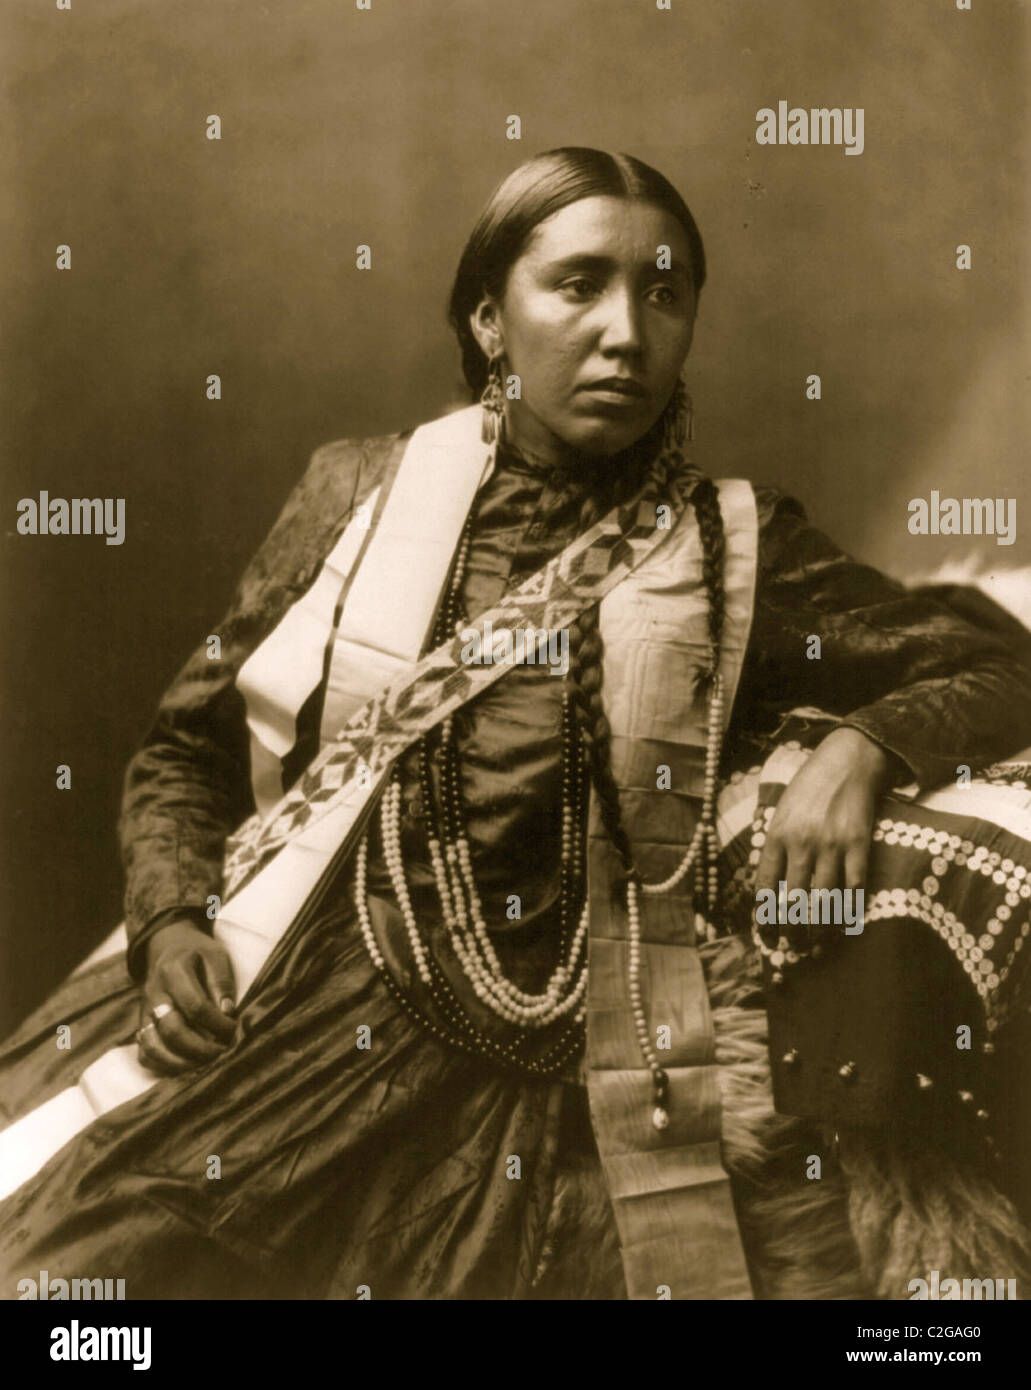 Sioux-Indianer: Susan Frost Stockfoto